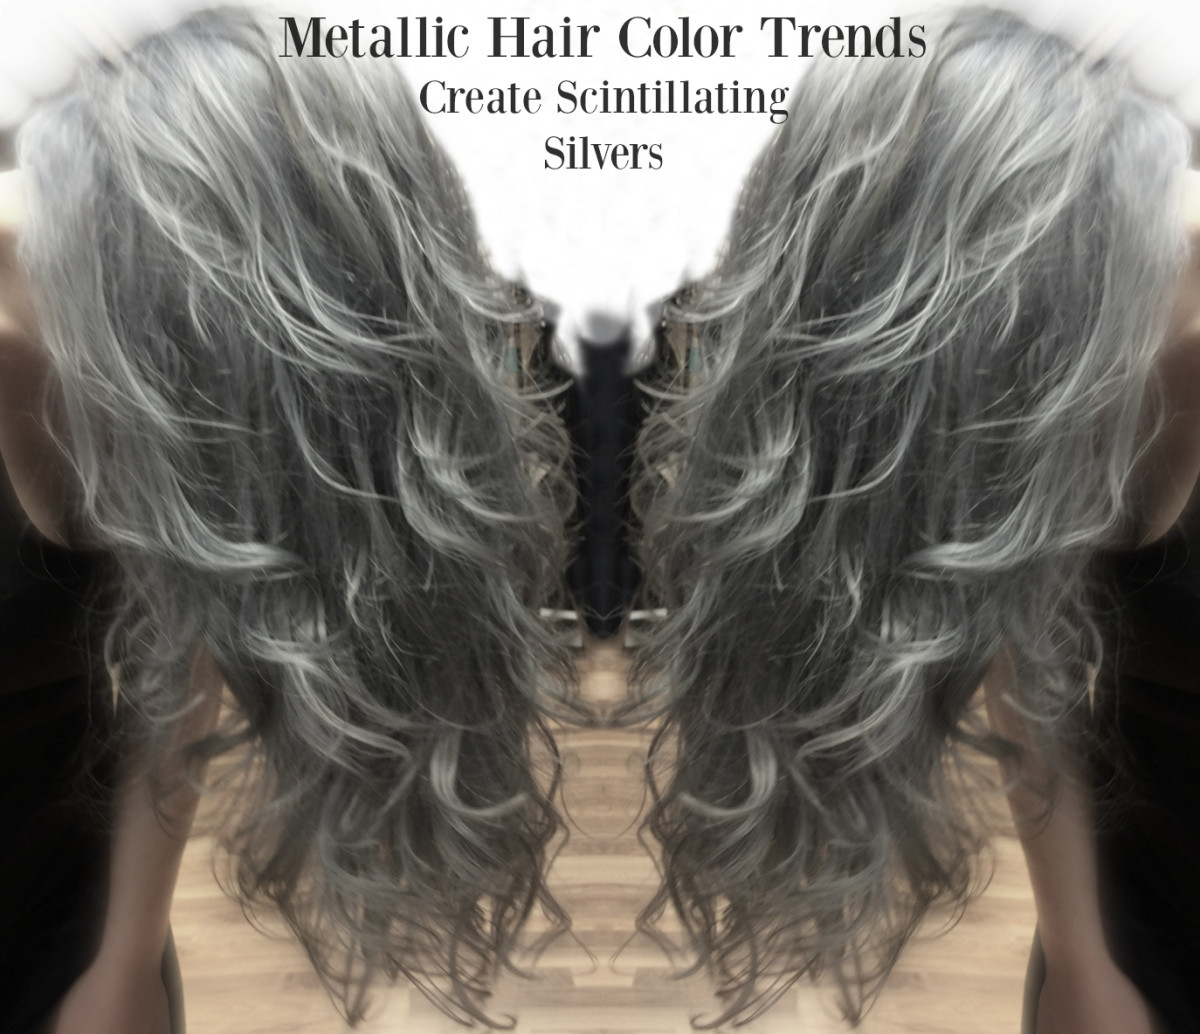 3 Metallic Hair Colors That Will Make You Look Like an A